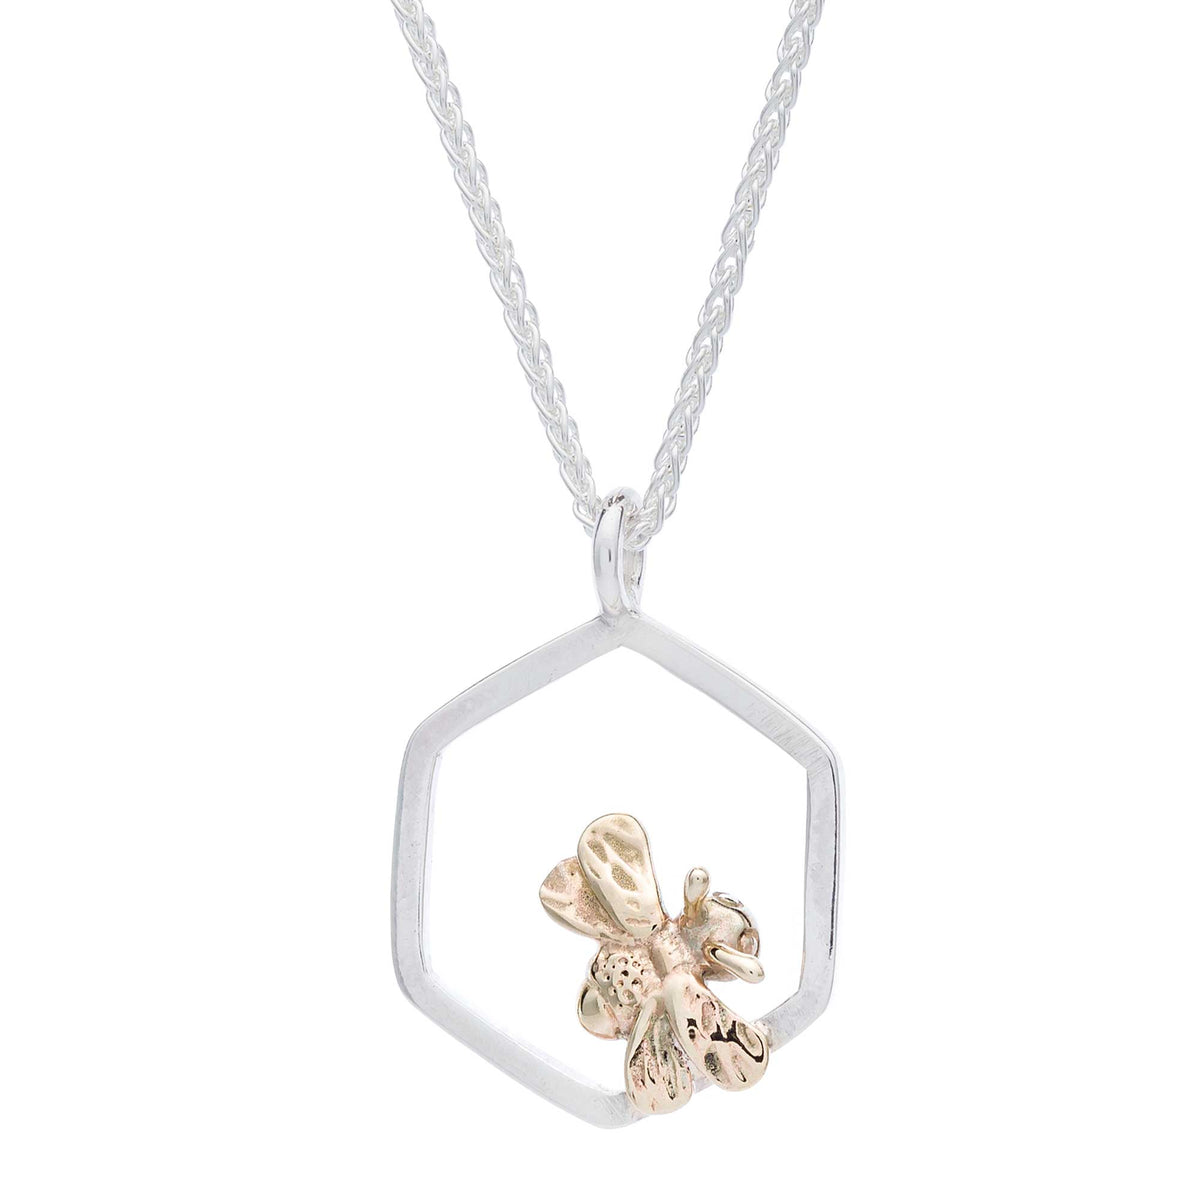 Tiny rested honeybee silver and gold necklace scarlett jewellery